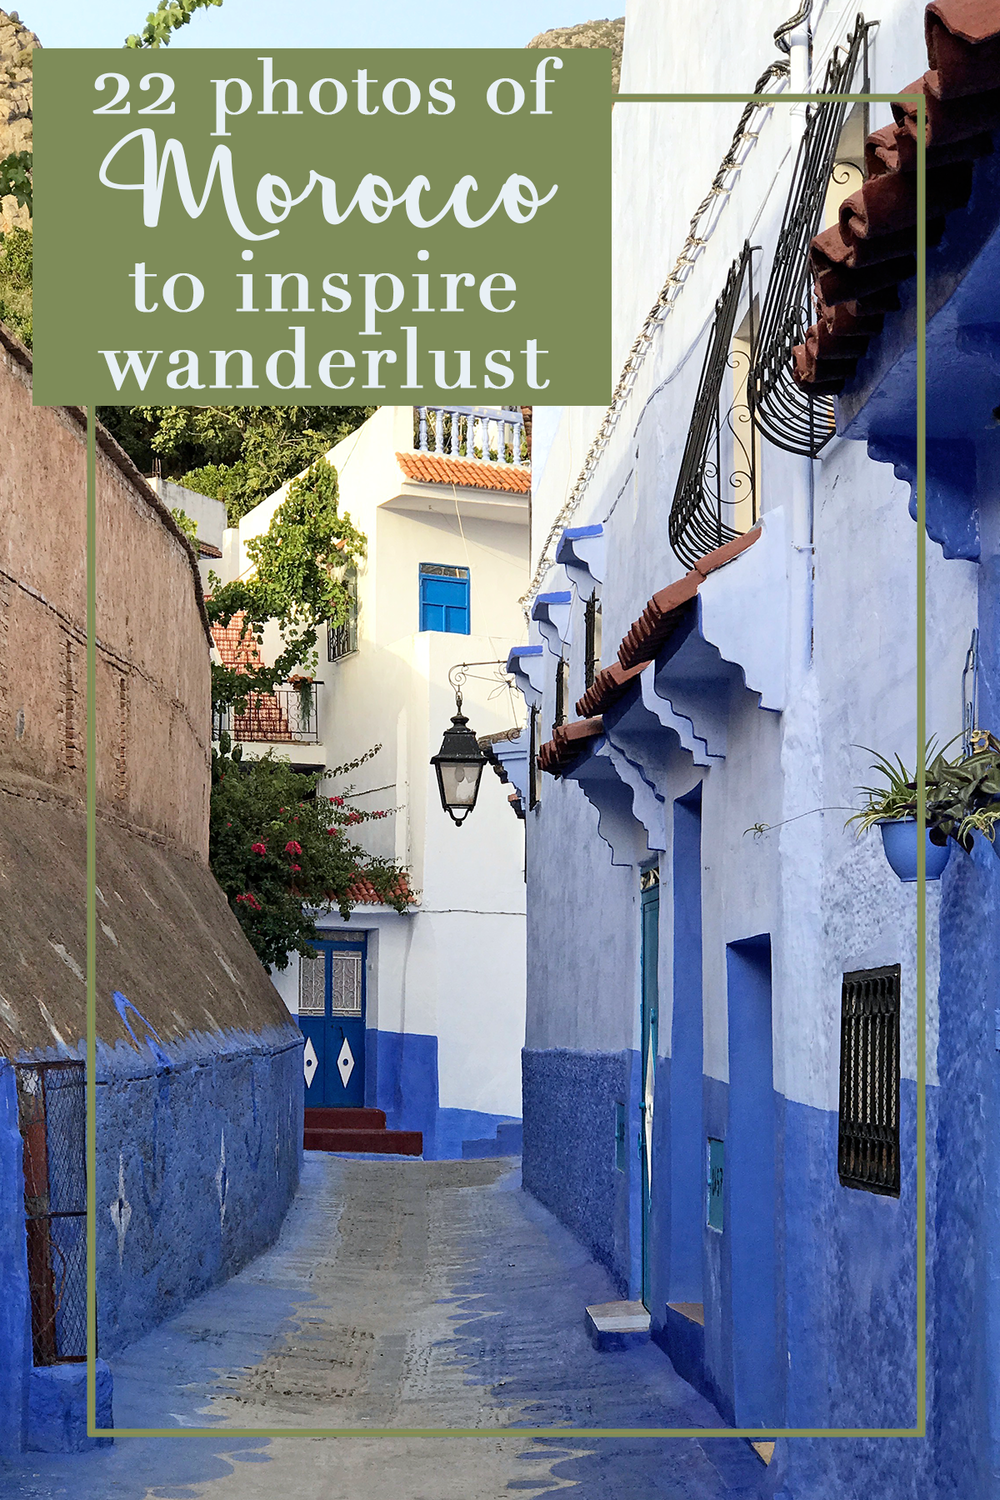 Photos of Morocco to Inspire Wanderlust